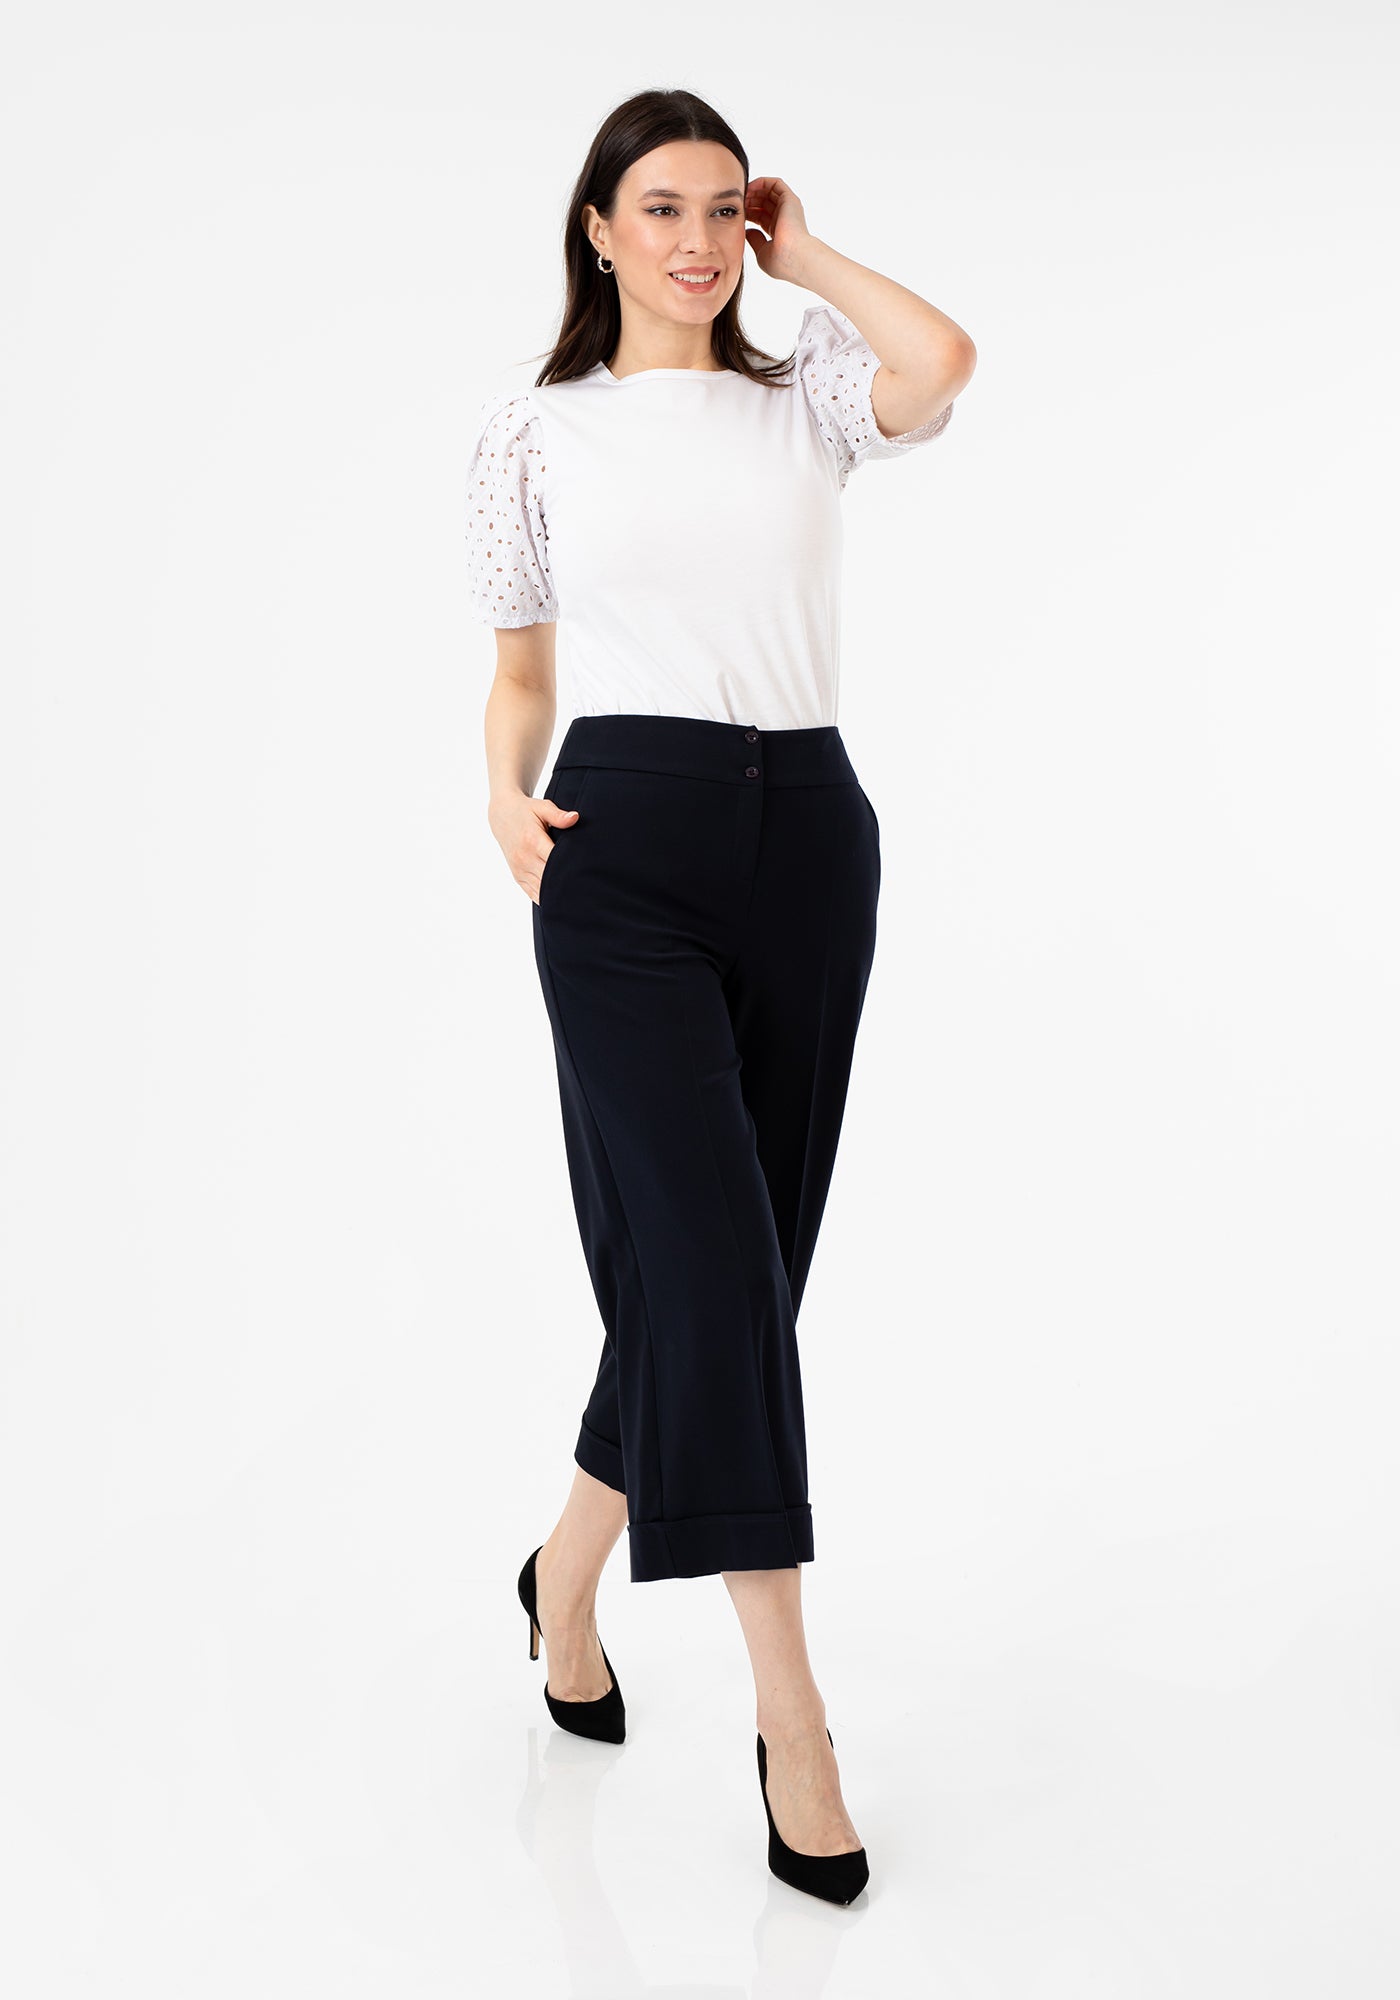 Alice + Olivia Employed Black Pleated Cropped Dress Pants Cuffed Hem  Polyester 0 conbral.com.br